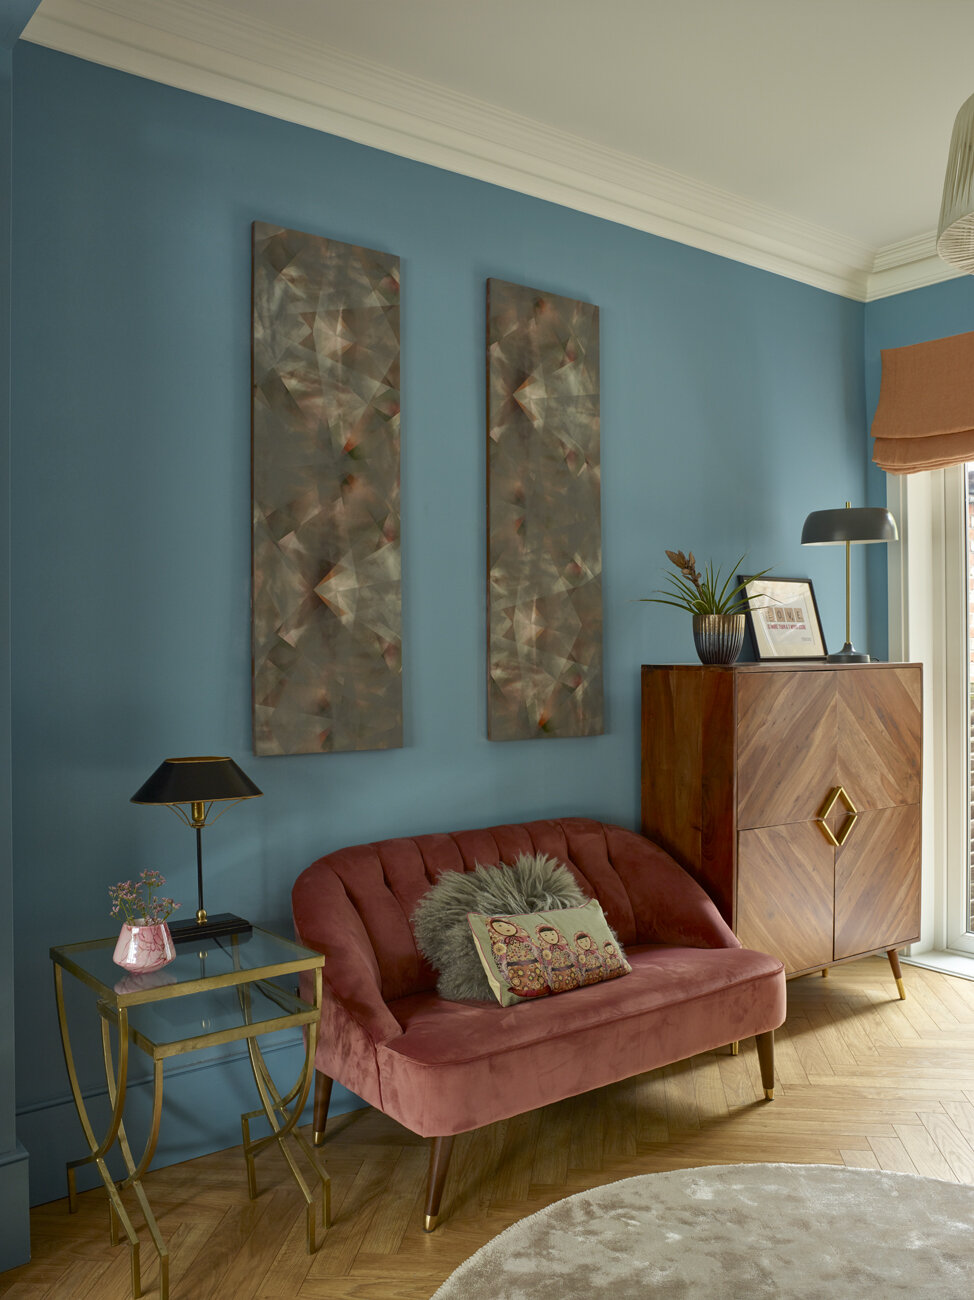 finchley-12-teal-lounge-coral-sofa.jpg